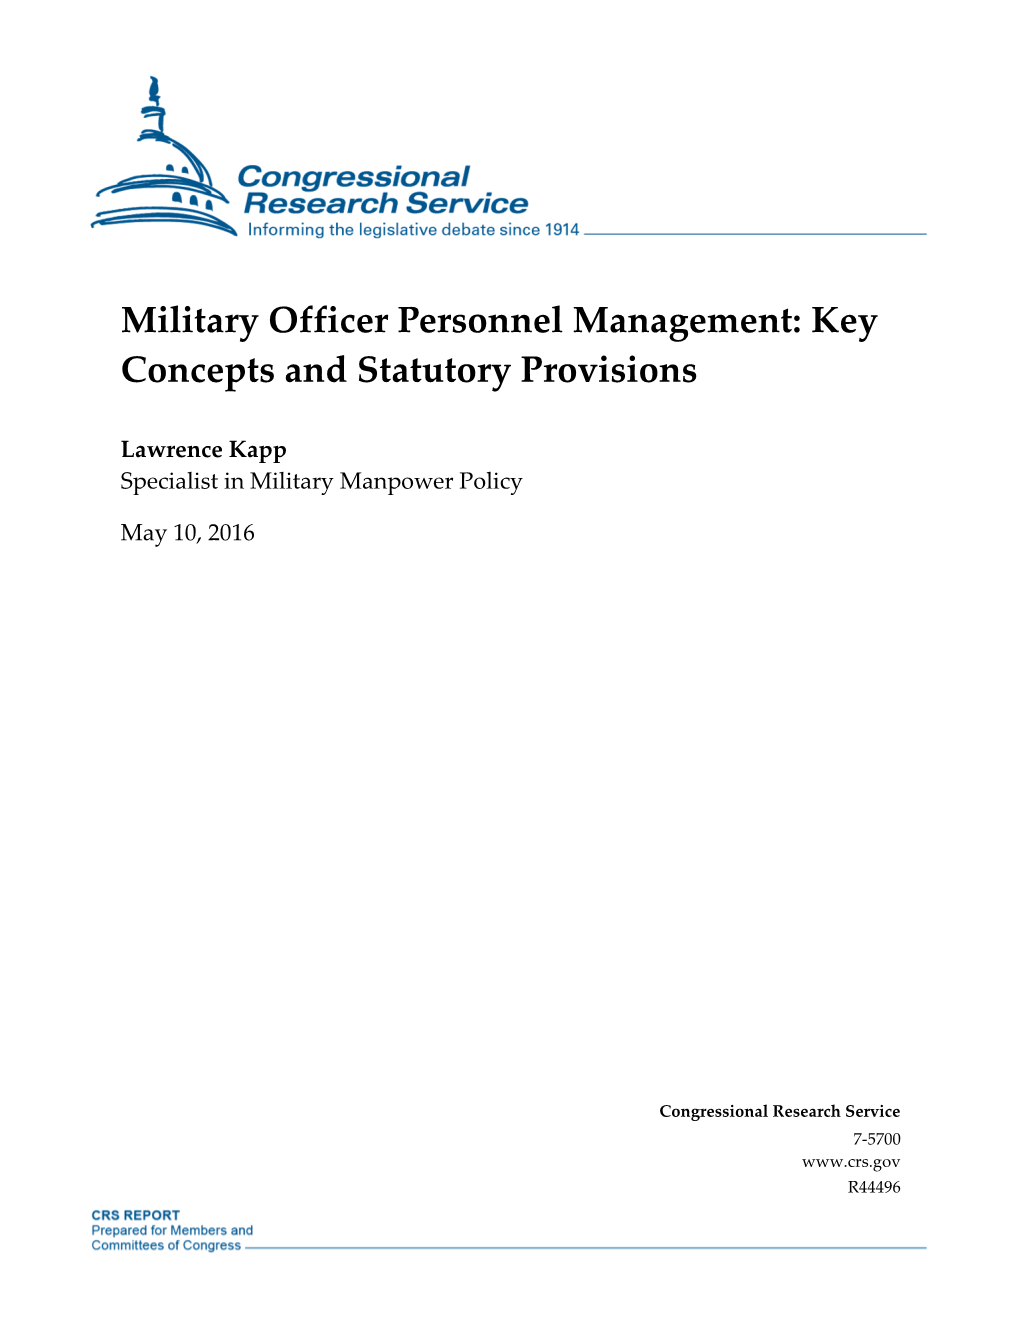 Military Officer Personnel Management: Key Concepts and Statutory Provisions